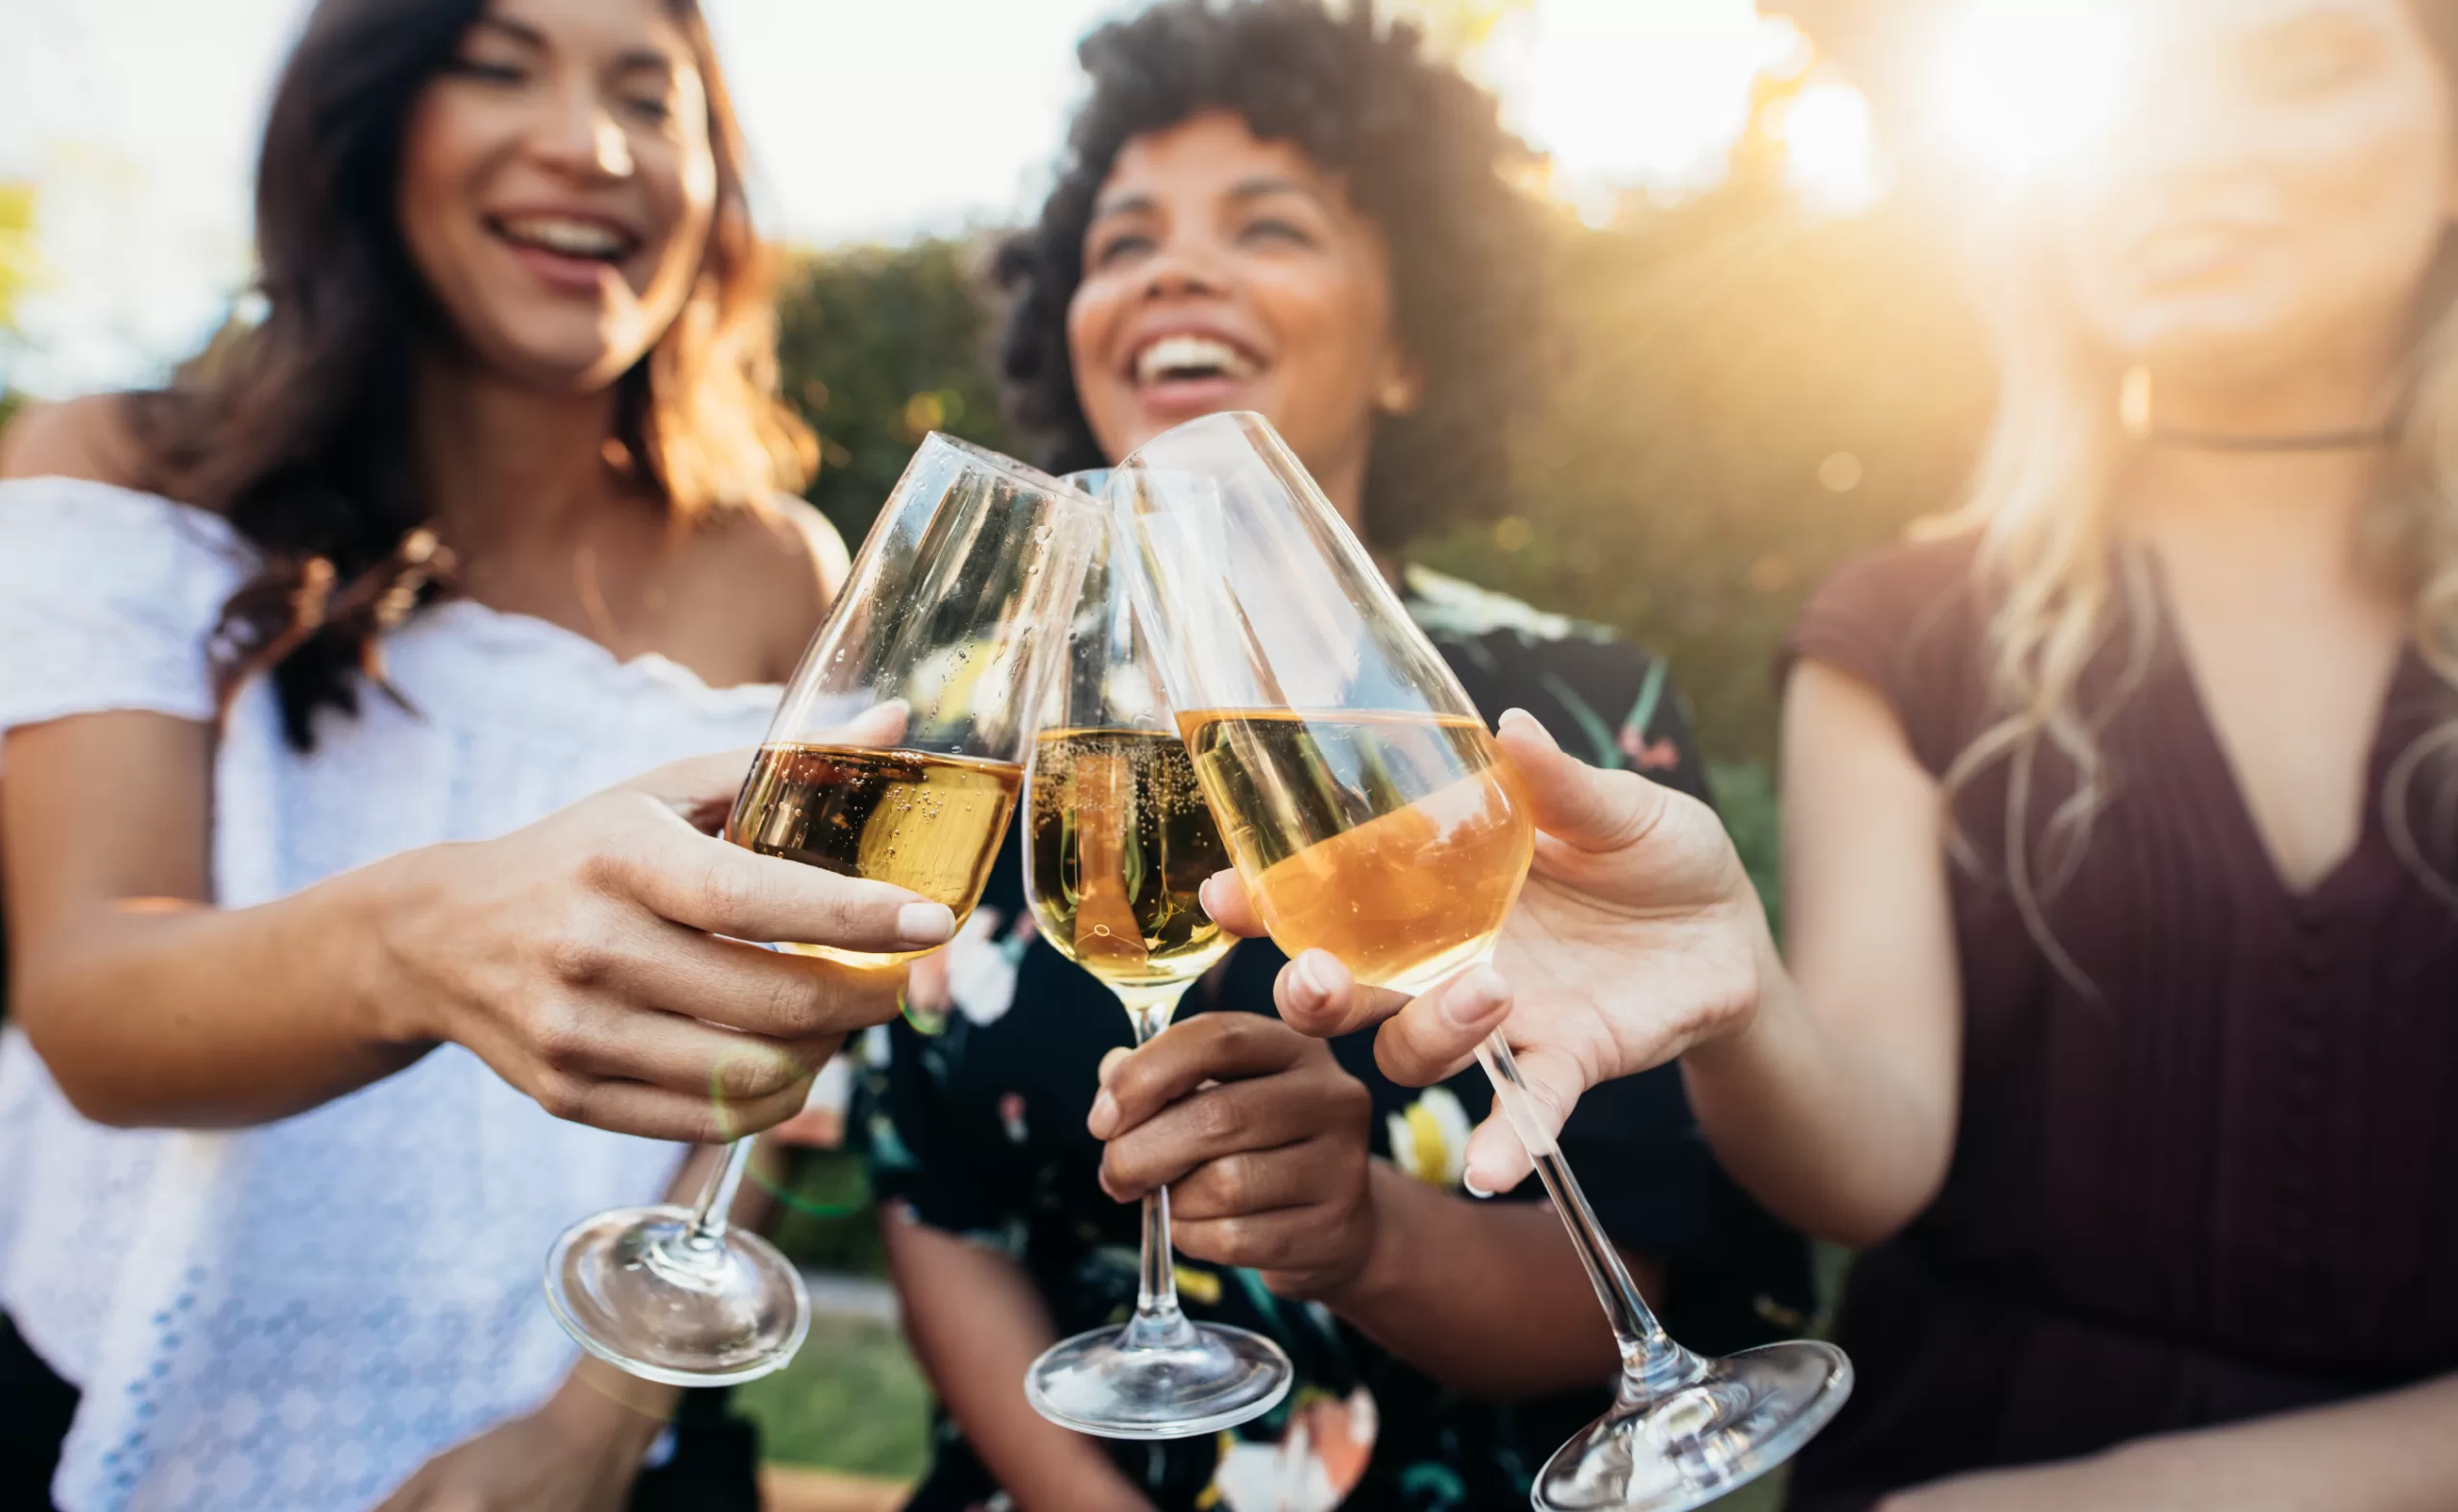 three young women enjoying white wine in a vineyard during golden hour